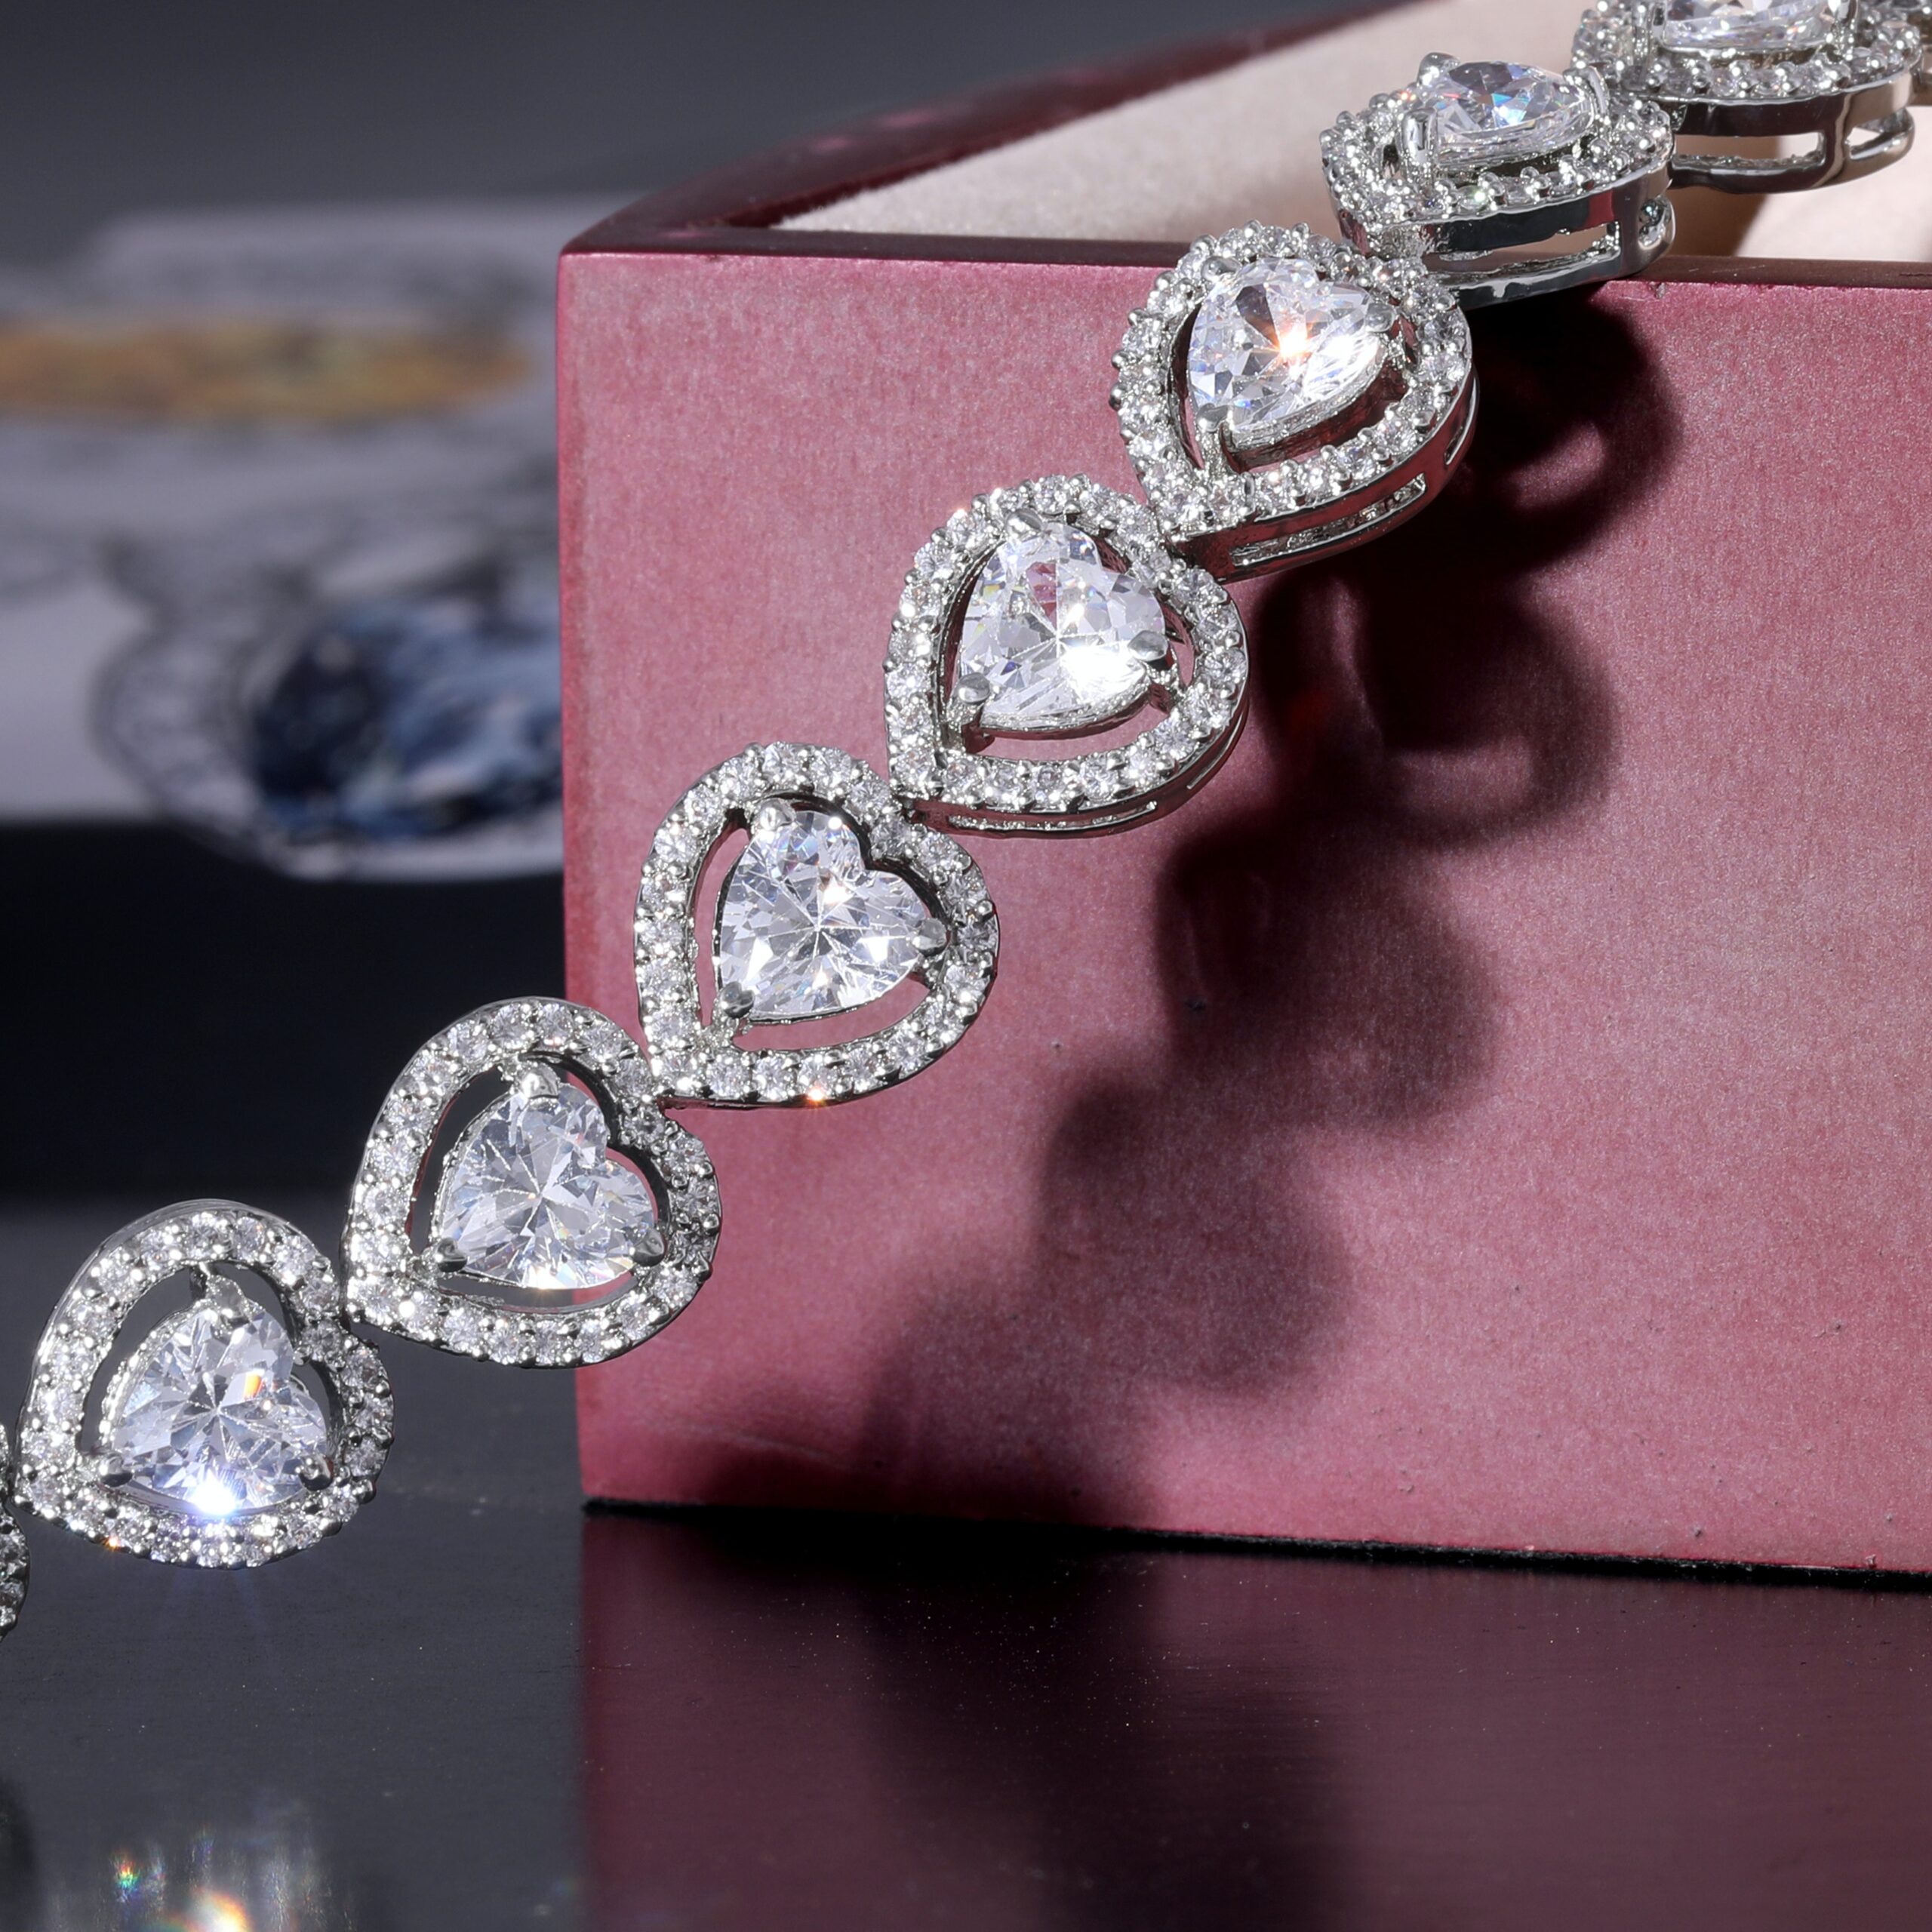 Can Buying Jewellery Be A Good Investment?